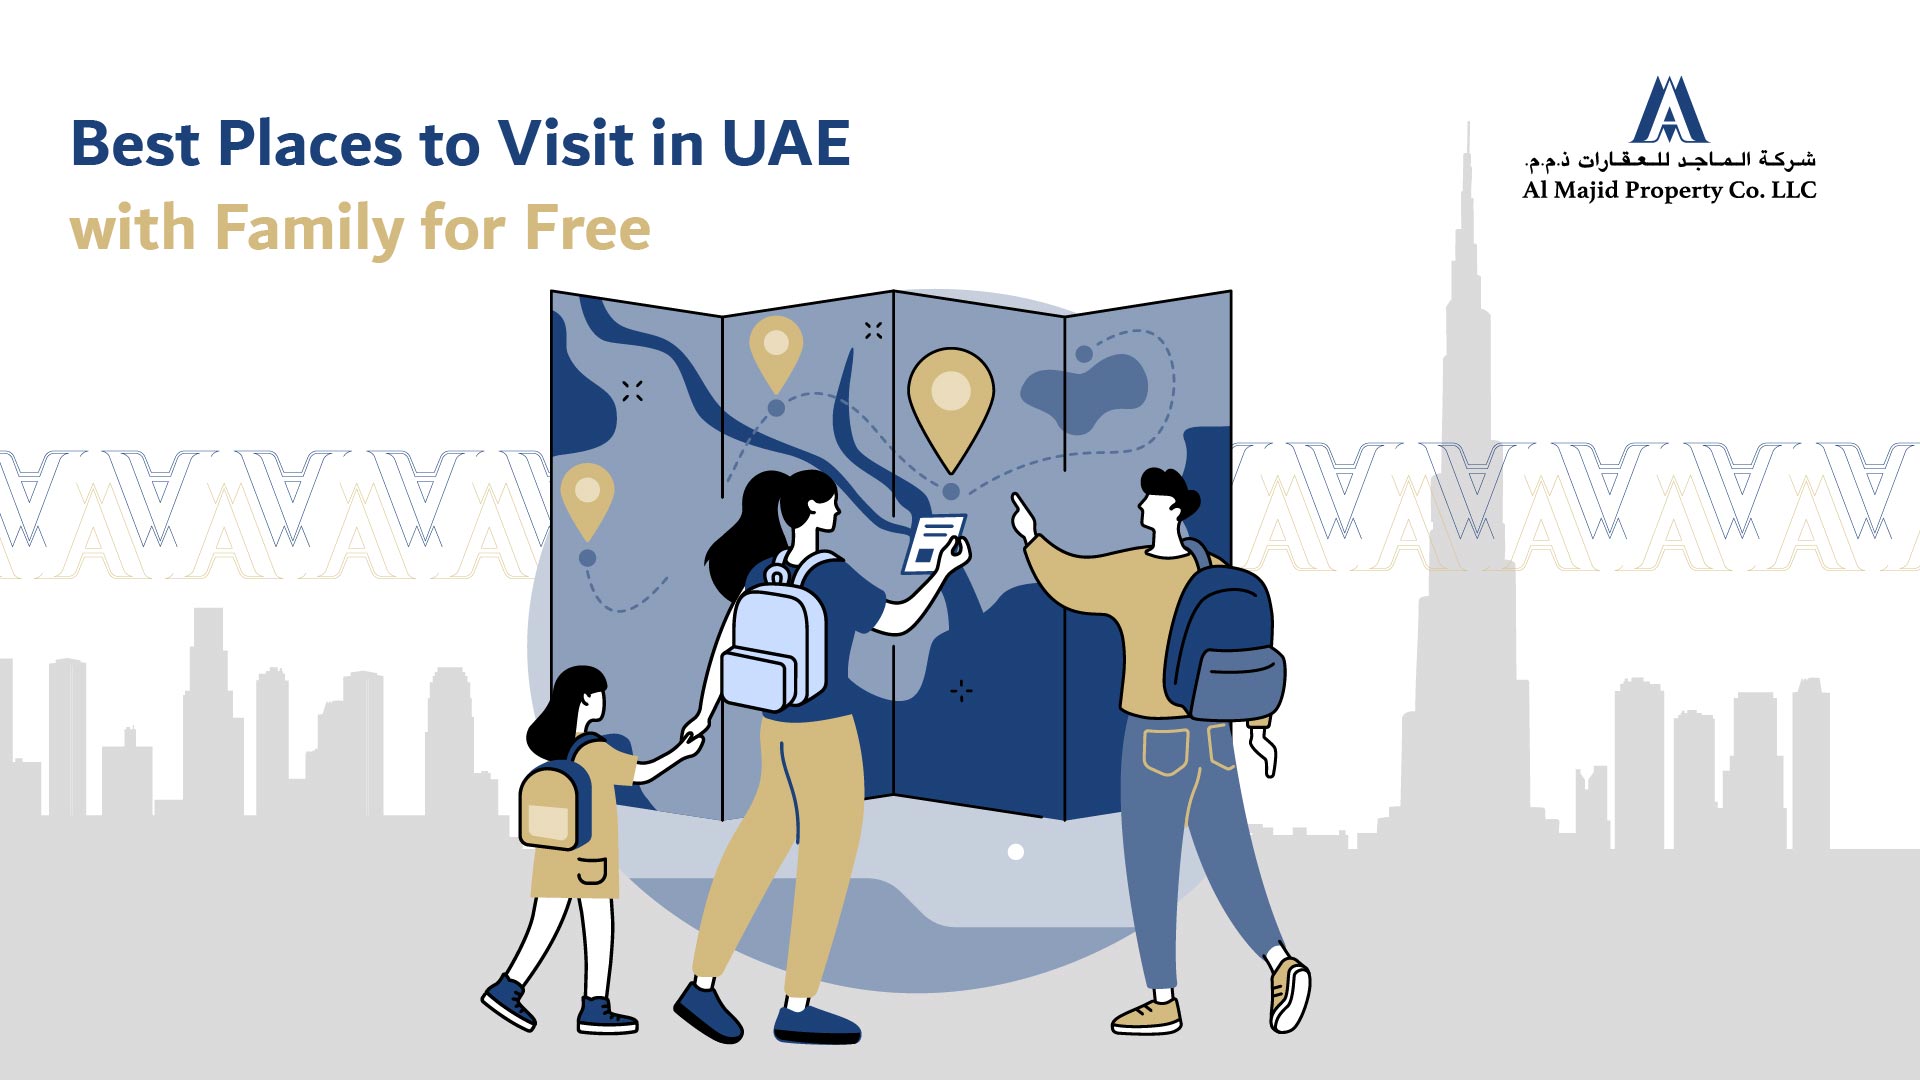 Best Places to Visit in UAE with Family for Free